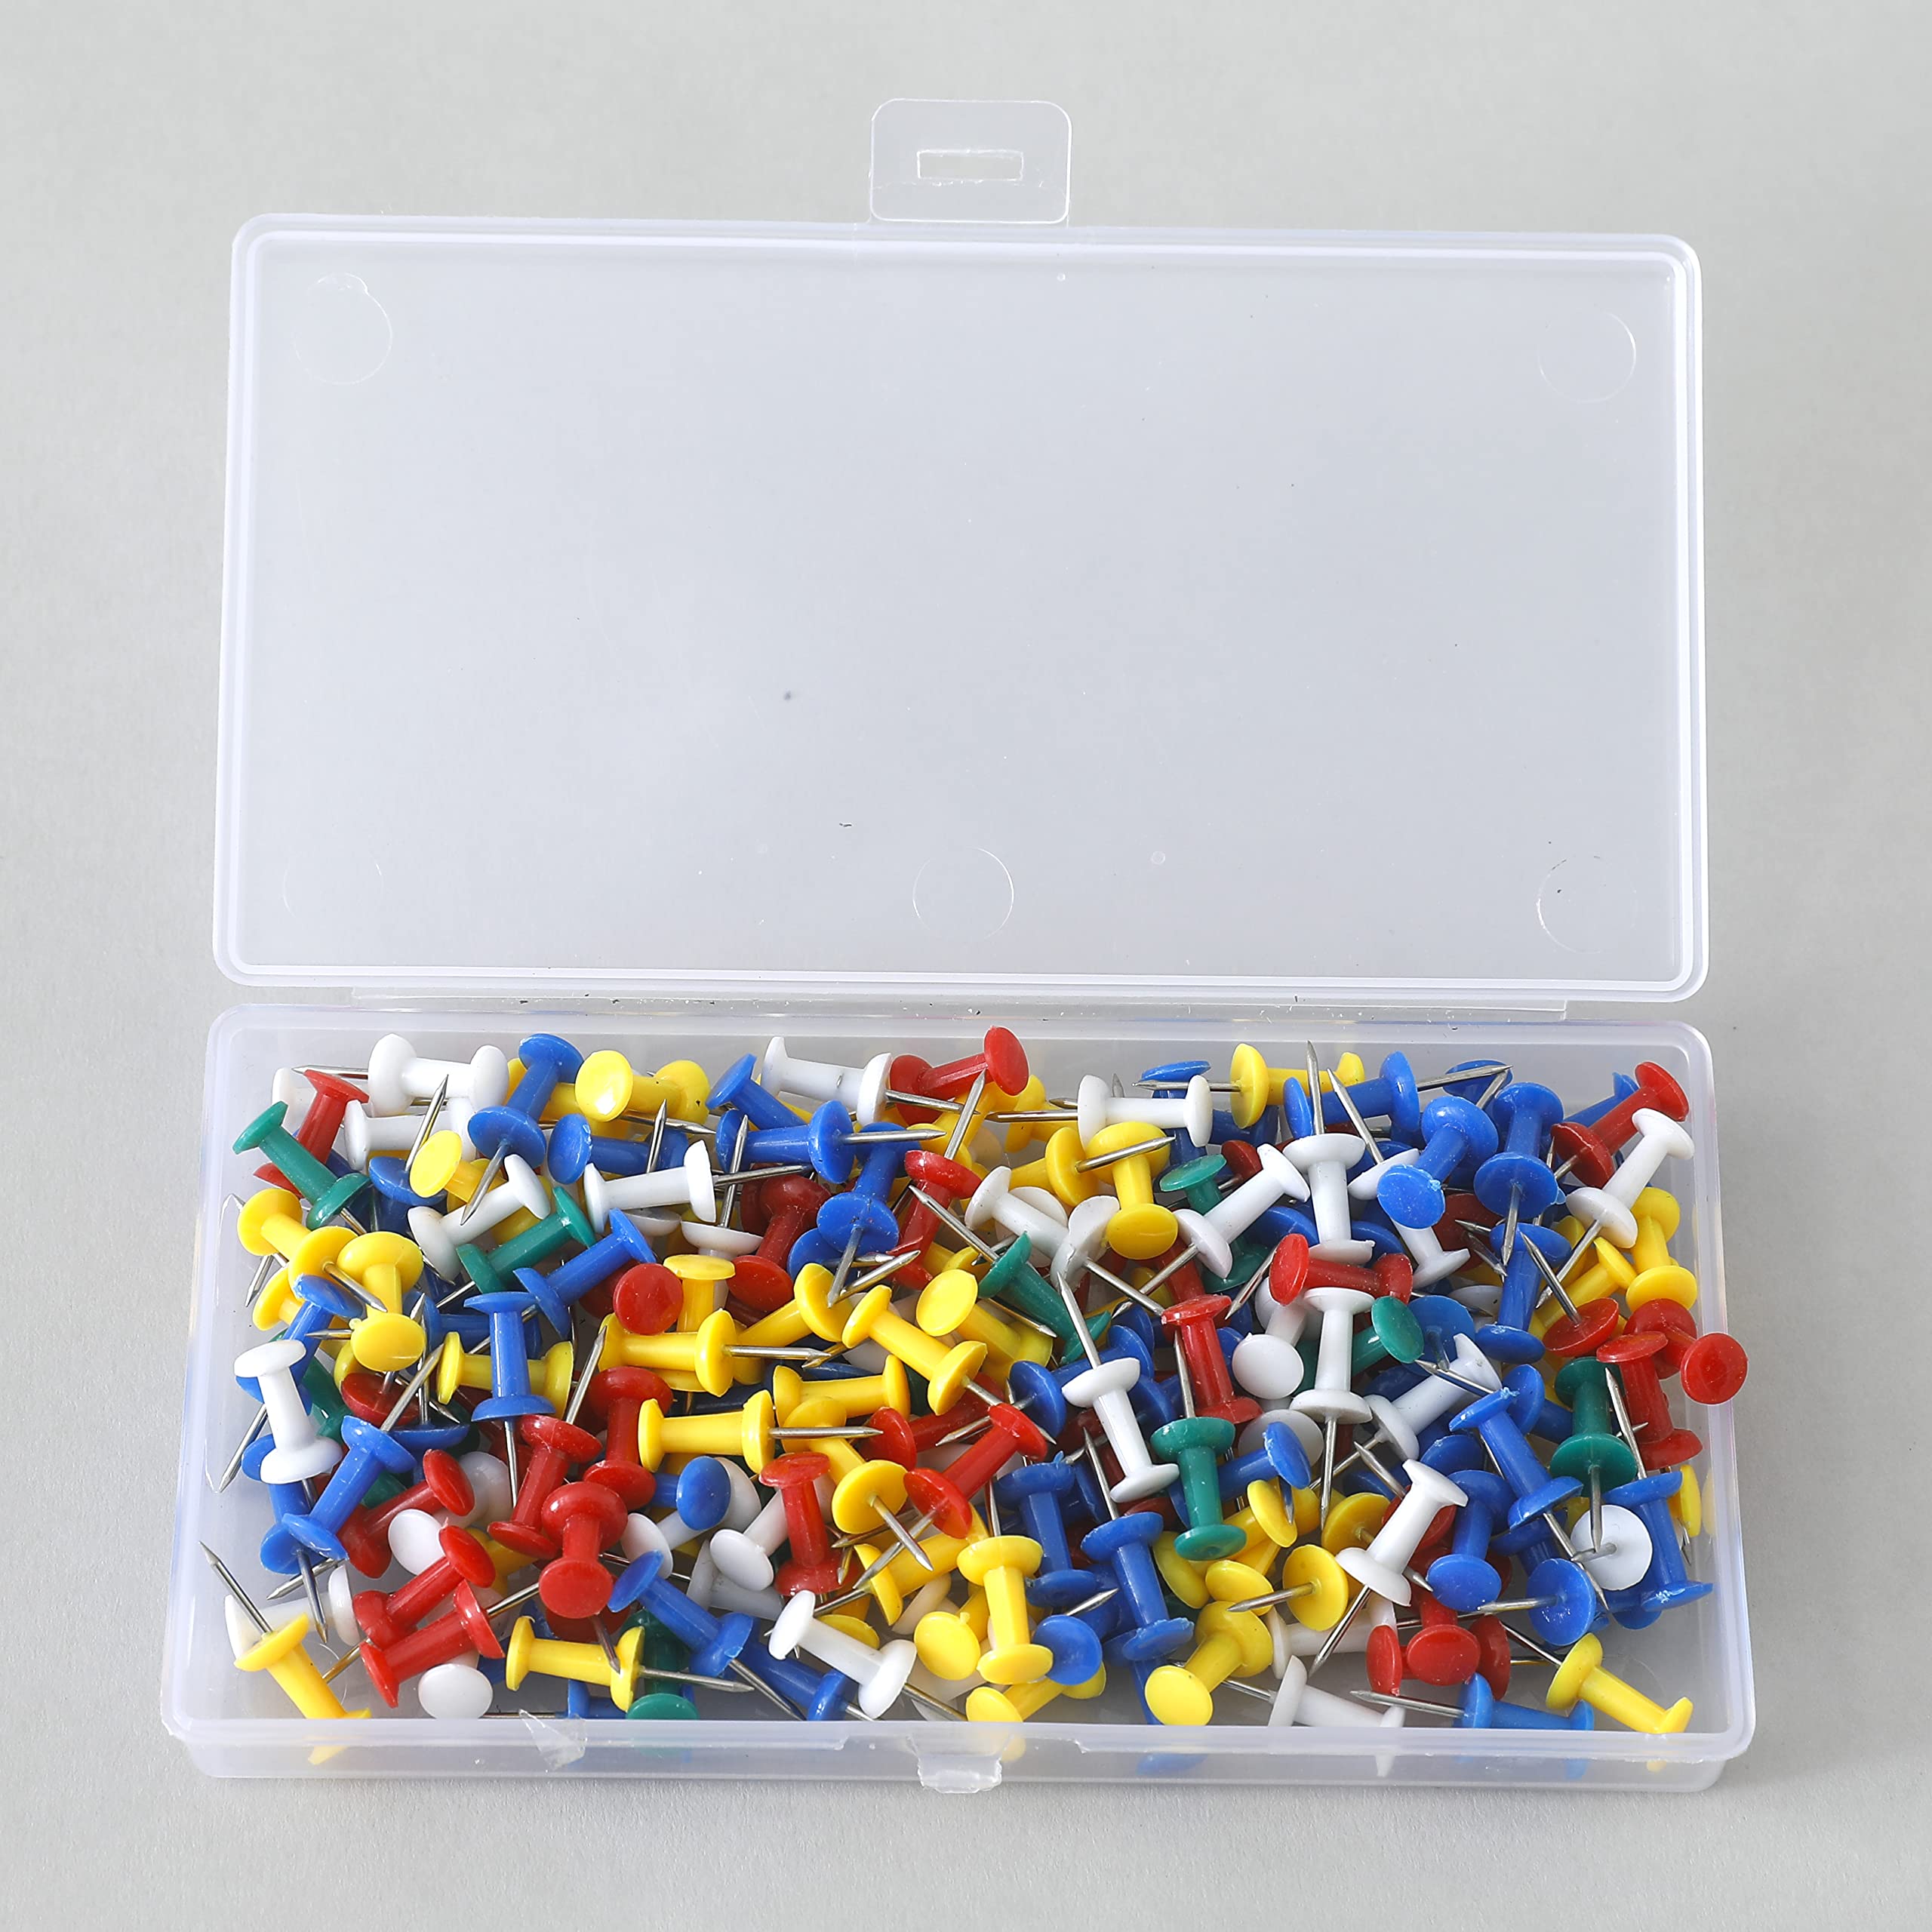 Kuber IndustriesSolid color Push Pins Tacks|Heavy-Duty Notice Board Pins"200" (Multi)